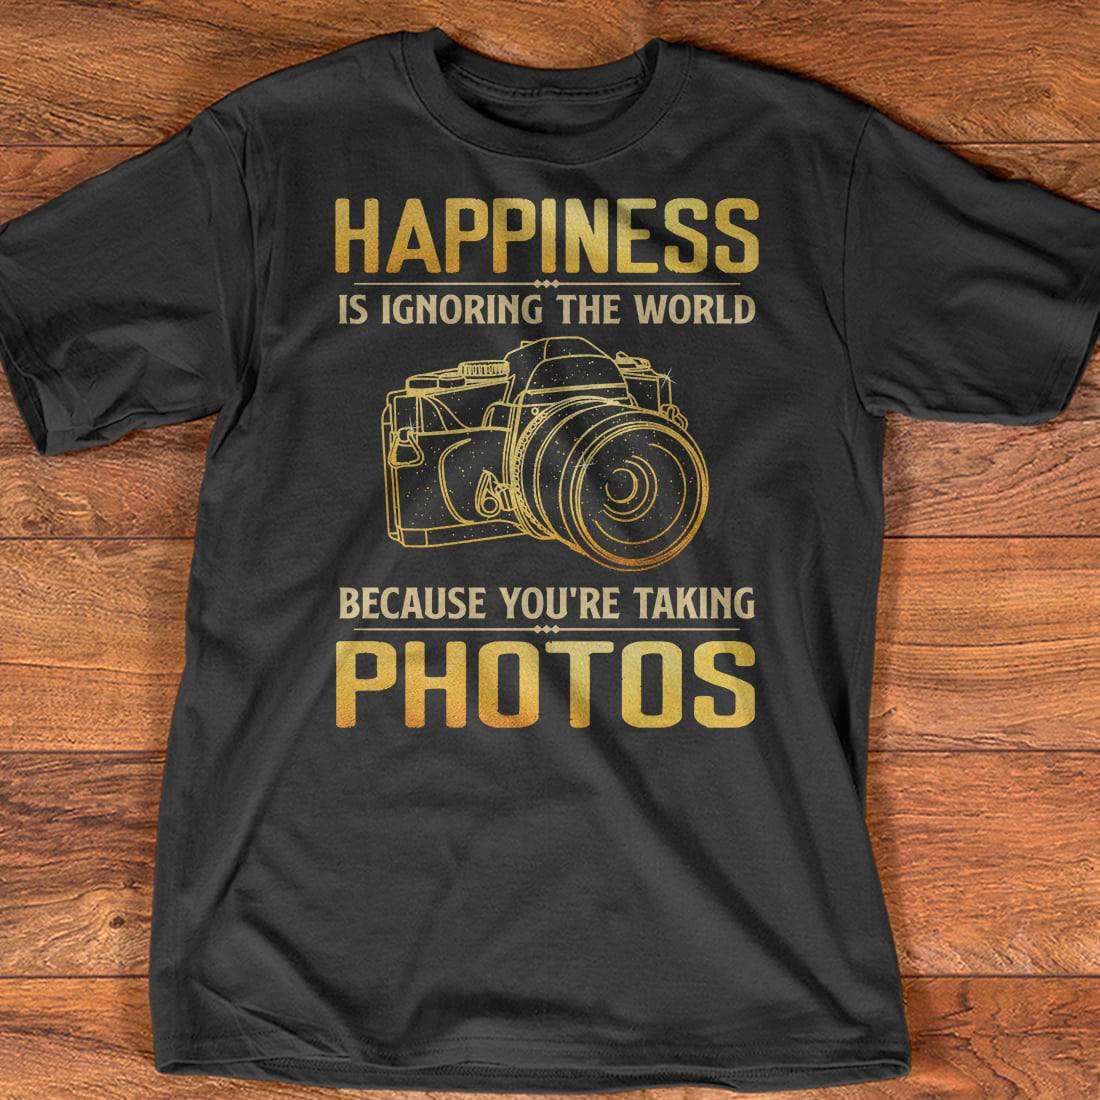 Happiness is ignoring the world because you're taking photos